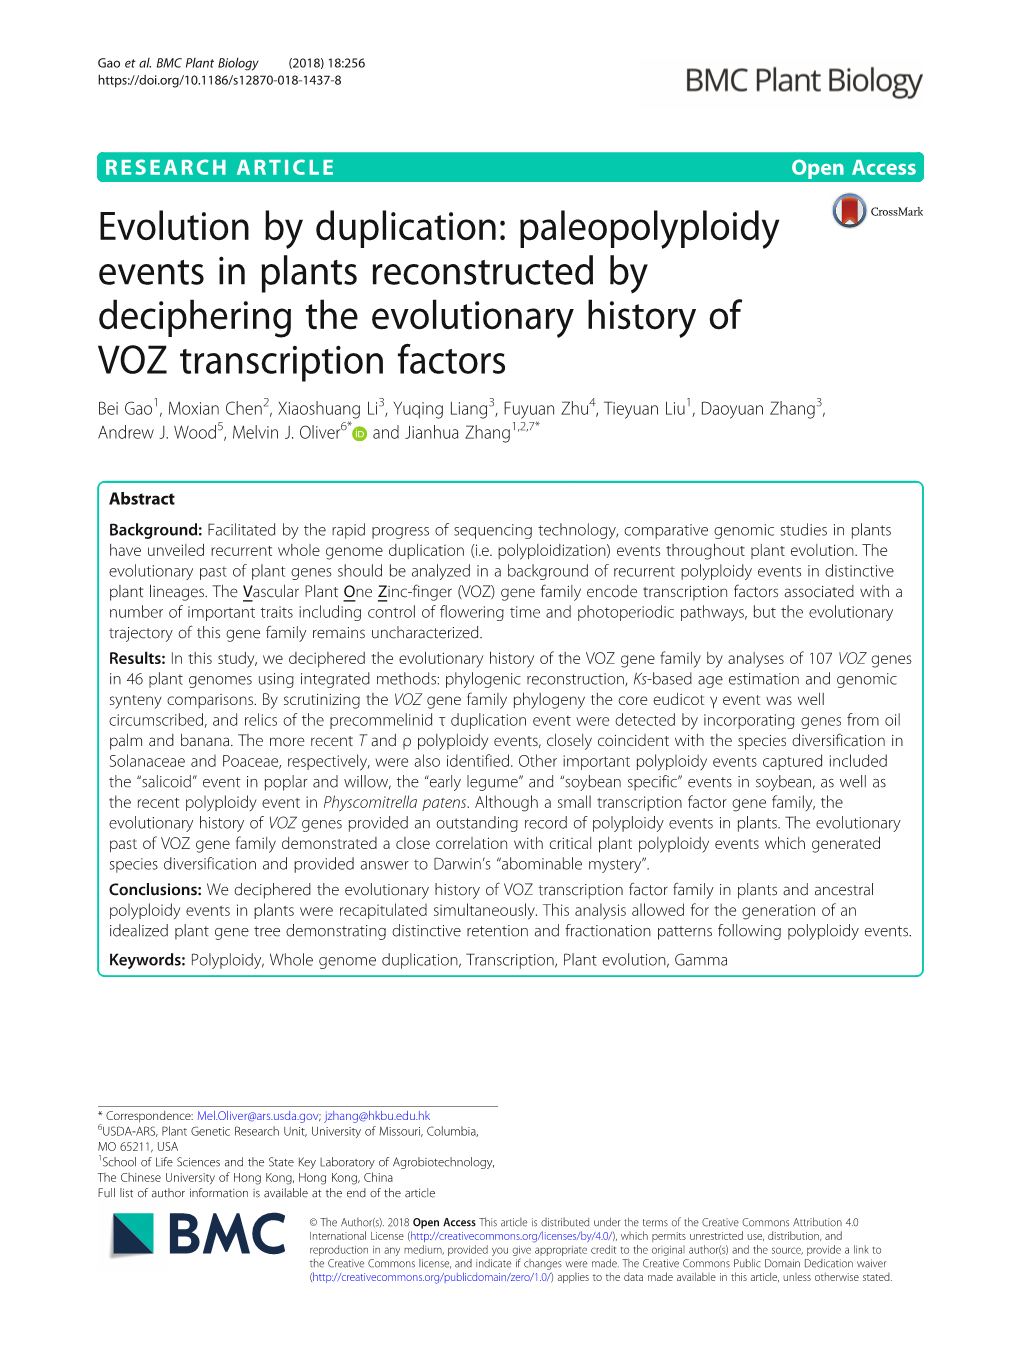 Evolution by Duplication: Paleopolyploidy Events in Plants